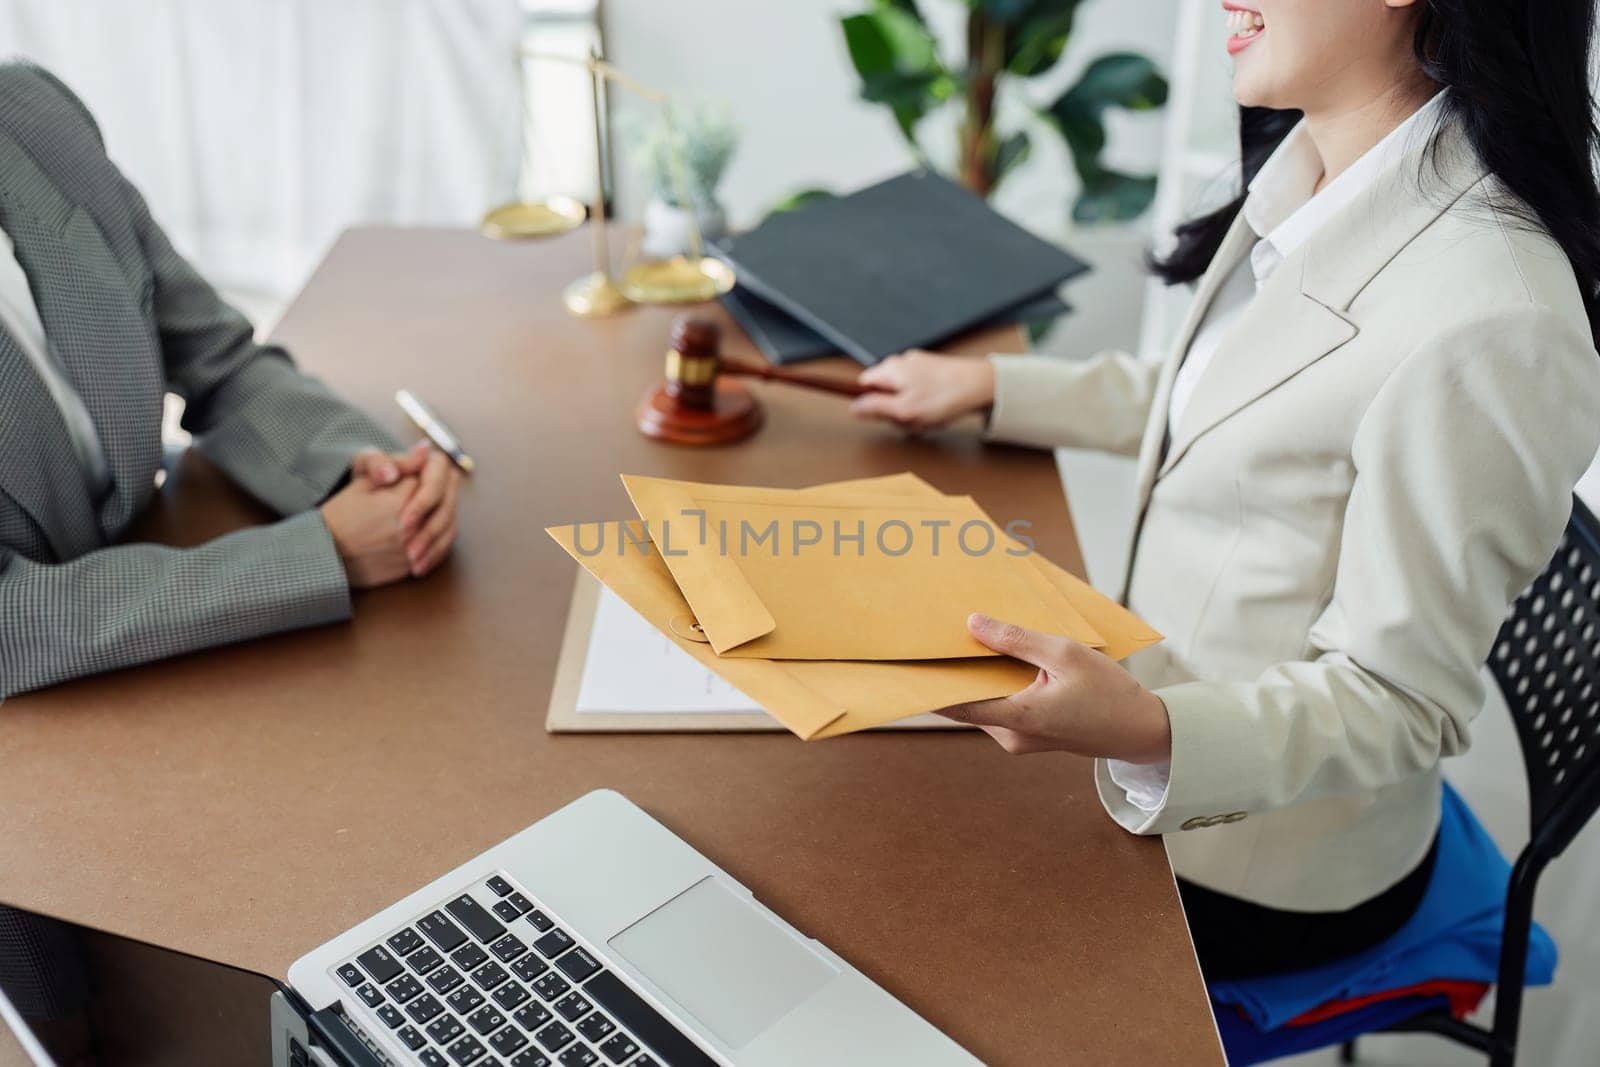 A woman is sitting at a desk with a stack of envelopes in front of her. She is holding the envelopes and she is in a professional setting